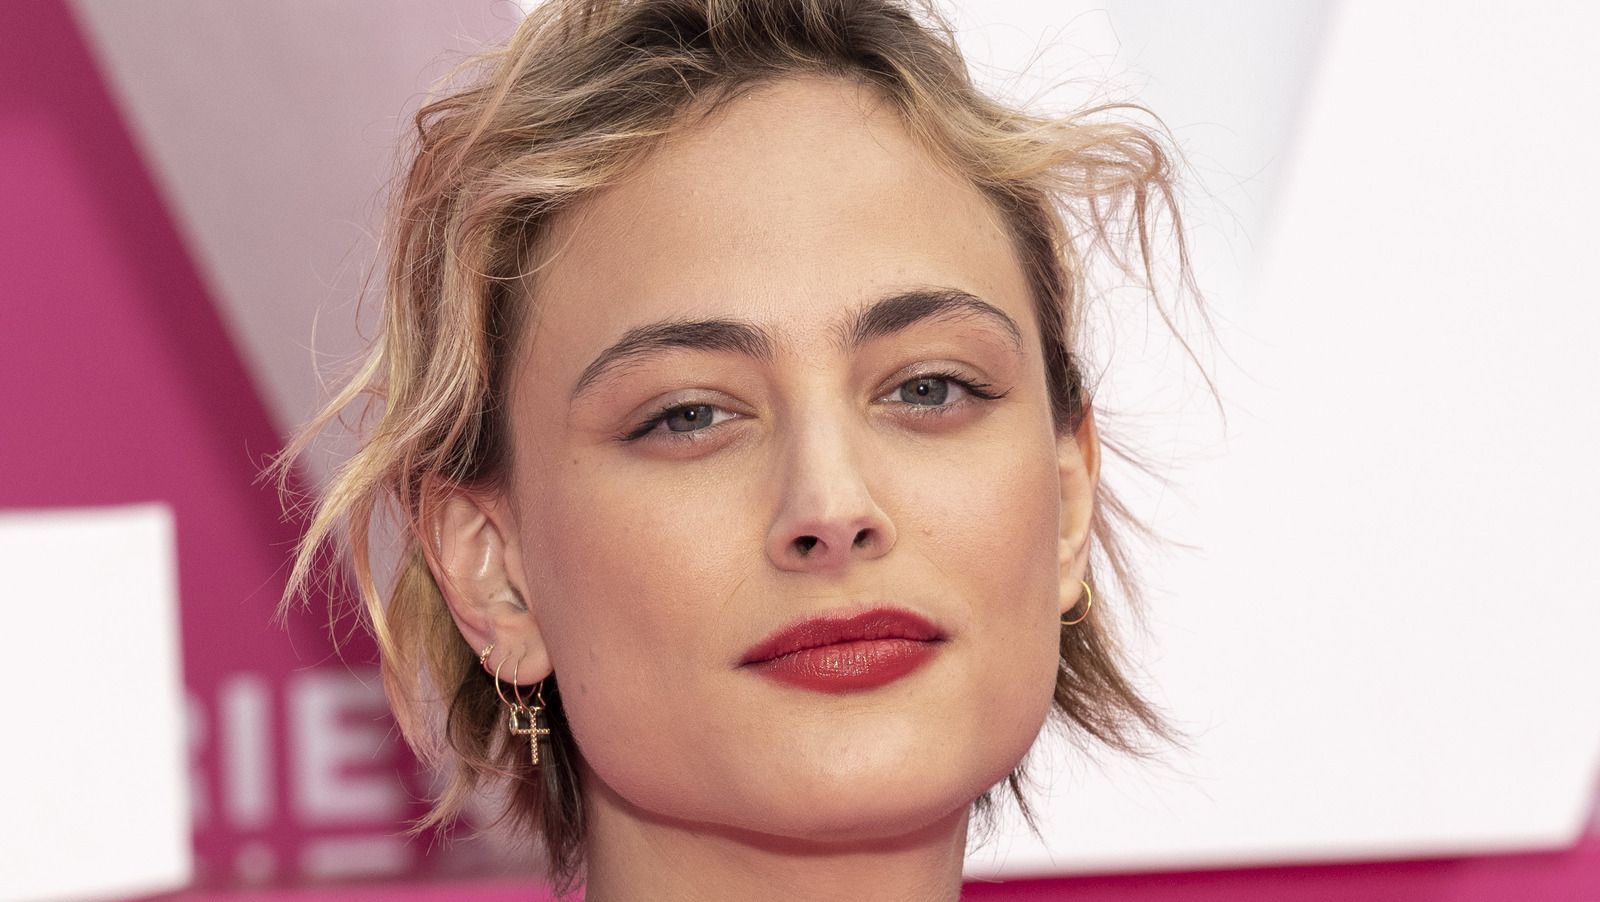 Army Of The Dead's Nora Arnezeder Reveals What She Loves About Dave Bautista